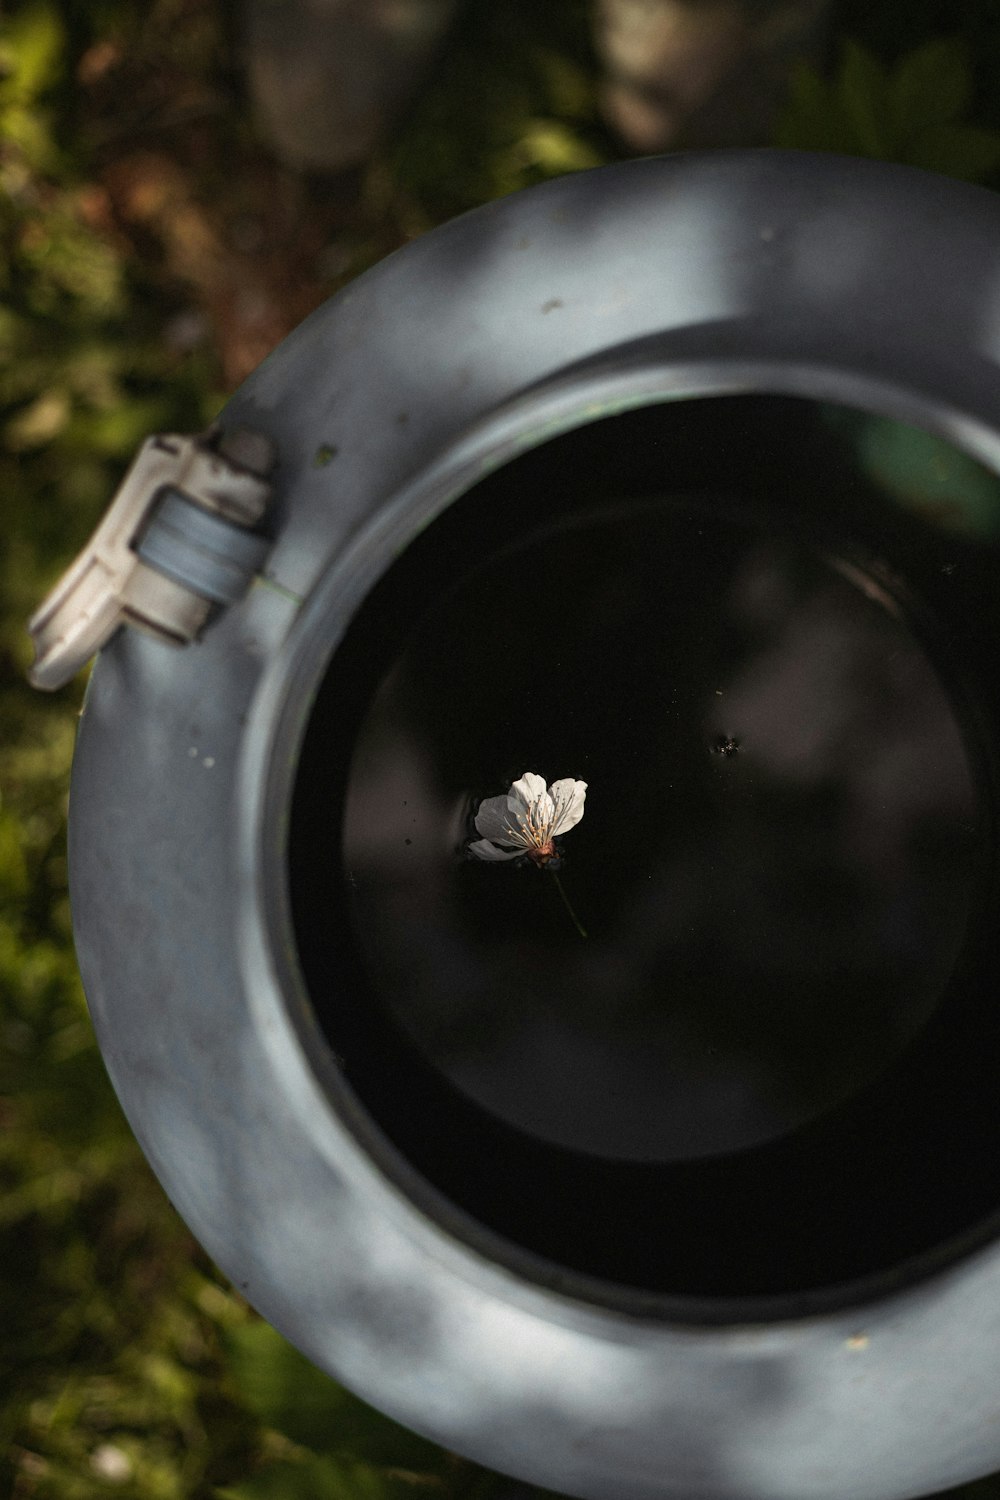 a spider in a round metal object